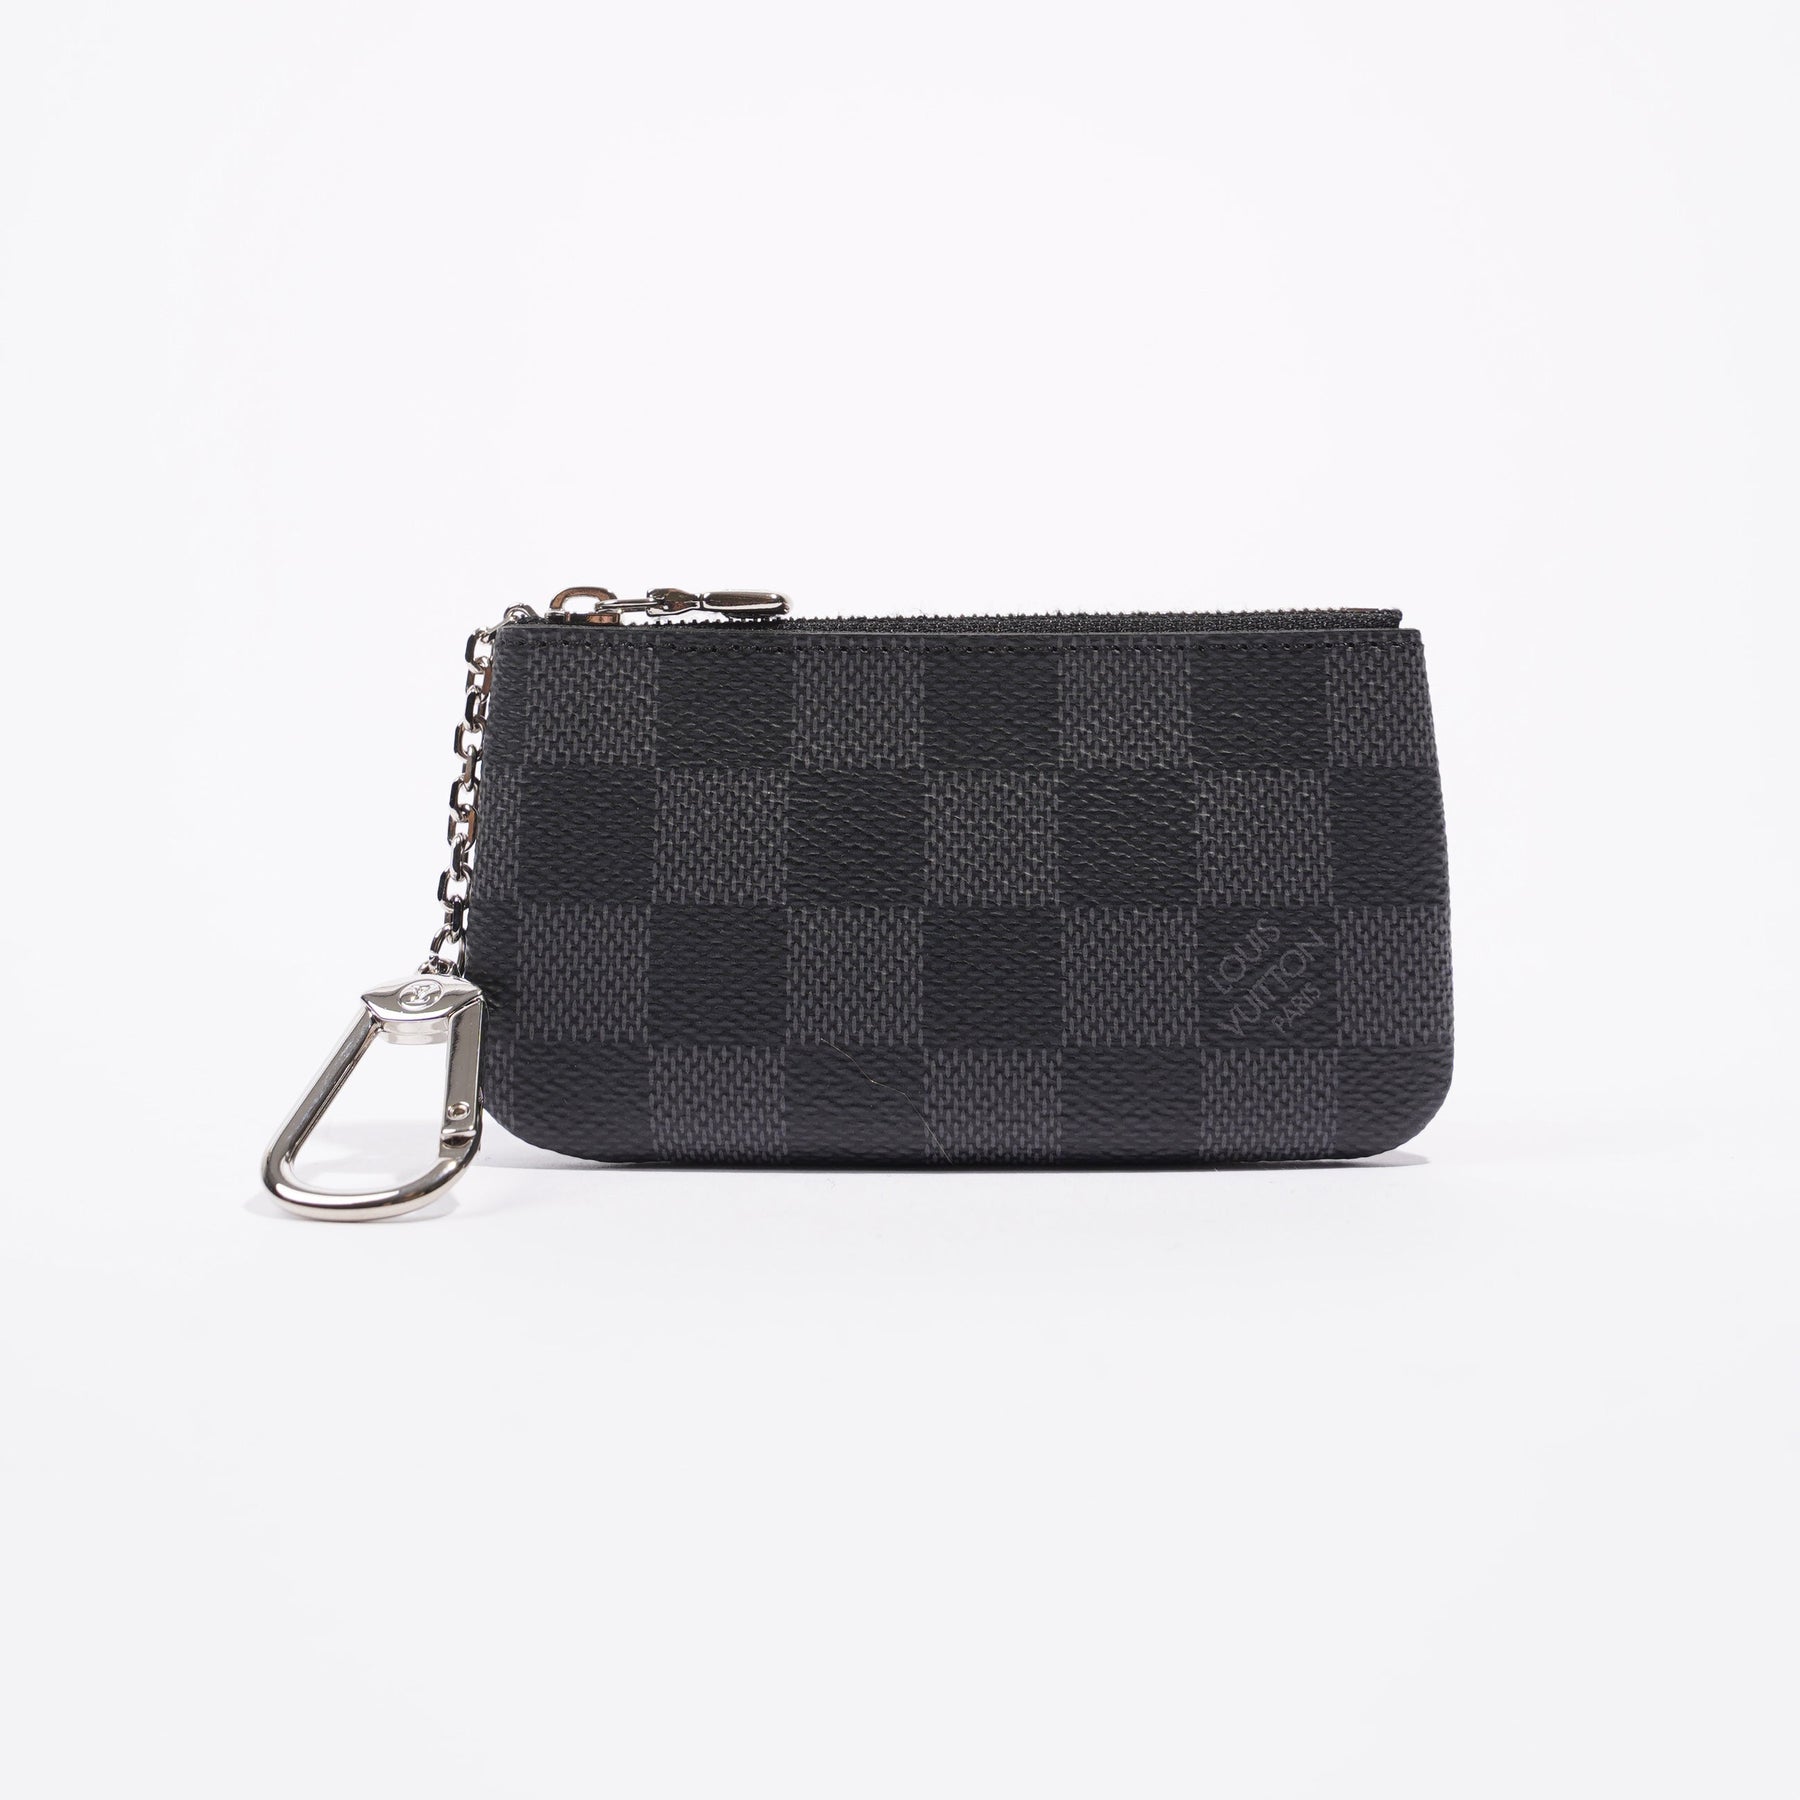 Key Pouch Damier Graphite - Wallets and Small Leather Goods